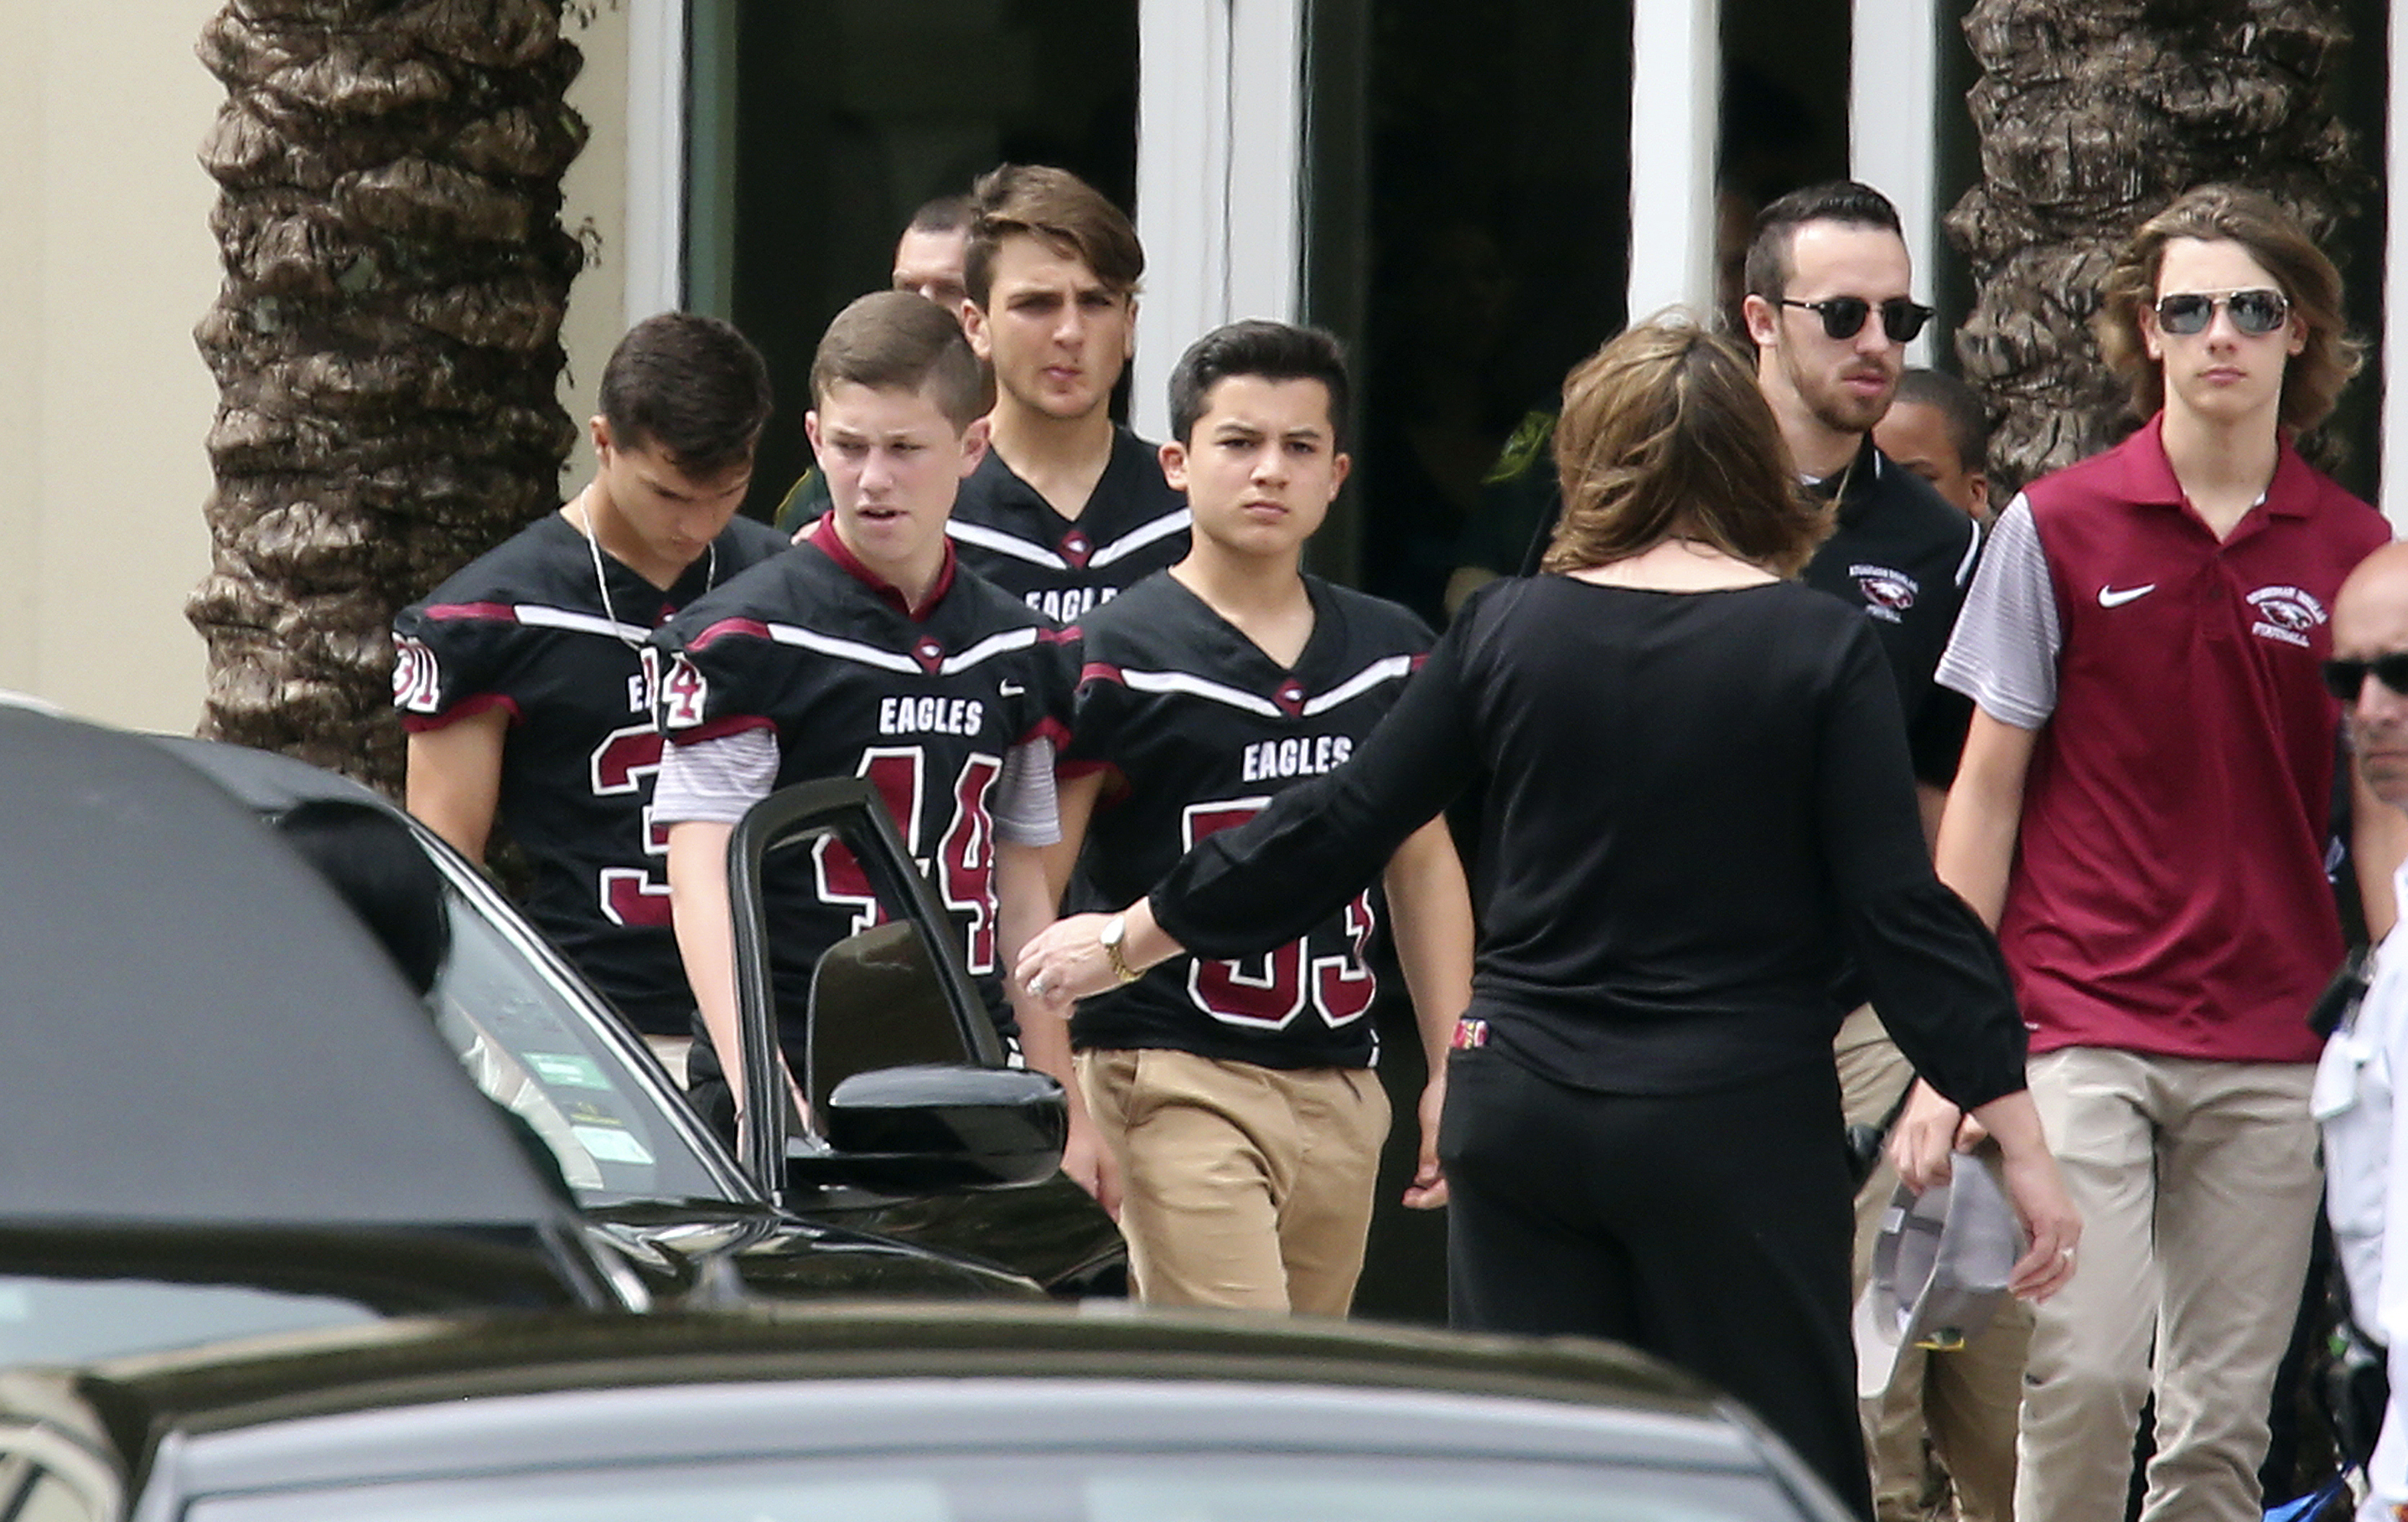 Members of the Marjory Stoneman Douglas High School football team depart after the funeral service for Aaron Feis at the Church by the Glades in Coral Springs, Florida (Joel Auerbach/AP)